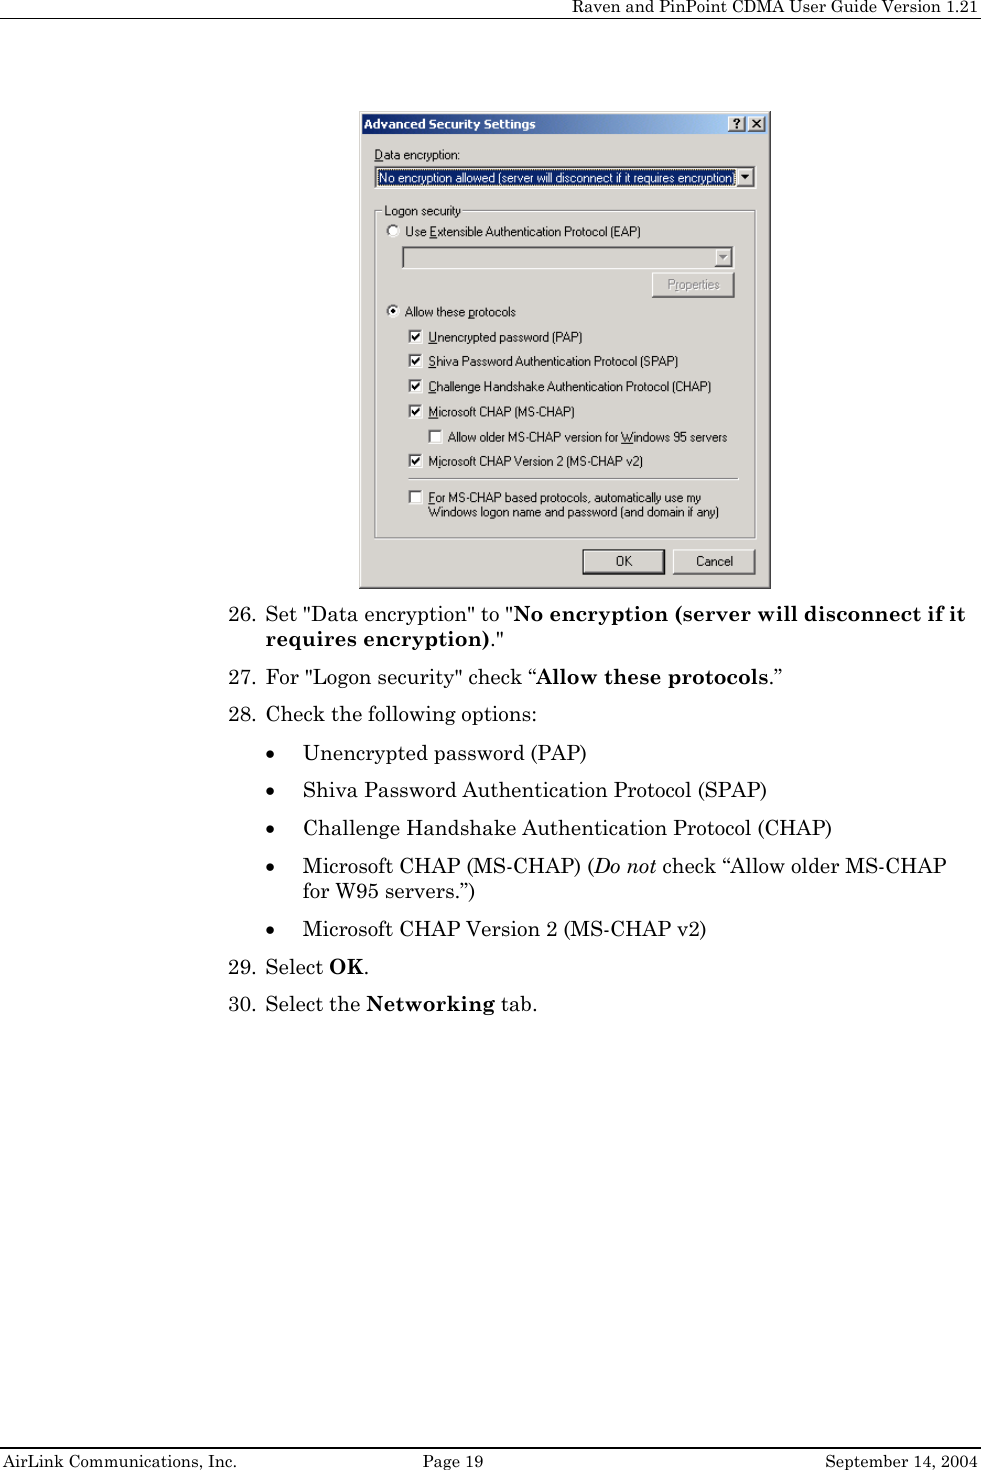     Raven and PinPoint CDMA User Guide Version 1.21  AirLink Communications, Inc.  Page 19  September 14, 2004  26. Set &quot;Data encryption&quot; to &quot;No encryption (server will disconnect if it requires encryption).&quot; 27. For &quot;Logon security&quot; check “Allow these protocols.” 28. Check the following options:  • Unencrypted password (PAP) • Shiva Password Authentication Protocol (SPAP) • Challenge Handshake Authentication Protocol (CHAP) • Microsoft CHAP (MS-CHAP) (Do not check “Allow older MS-CHAP for W95 servers.”) • Microsoft CHAP Version 2 (MS-CHAP v2) 29. Select OK. 30. Select the Networking tab. 